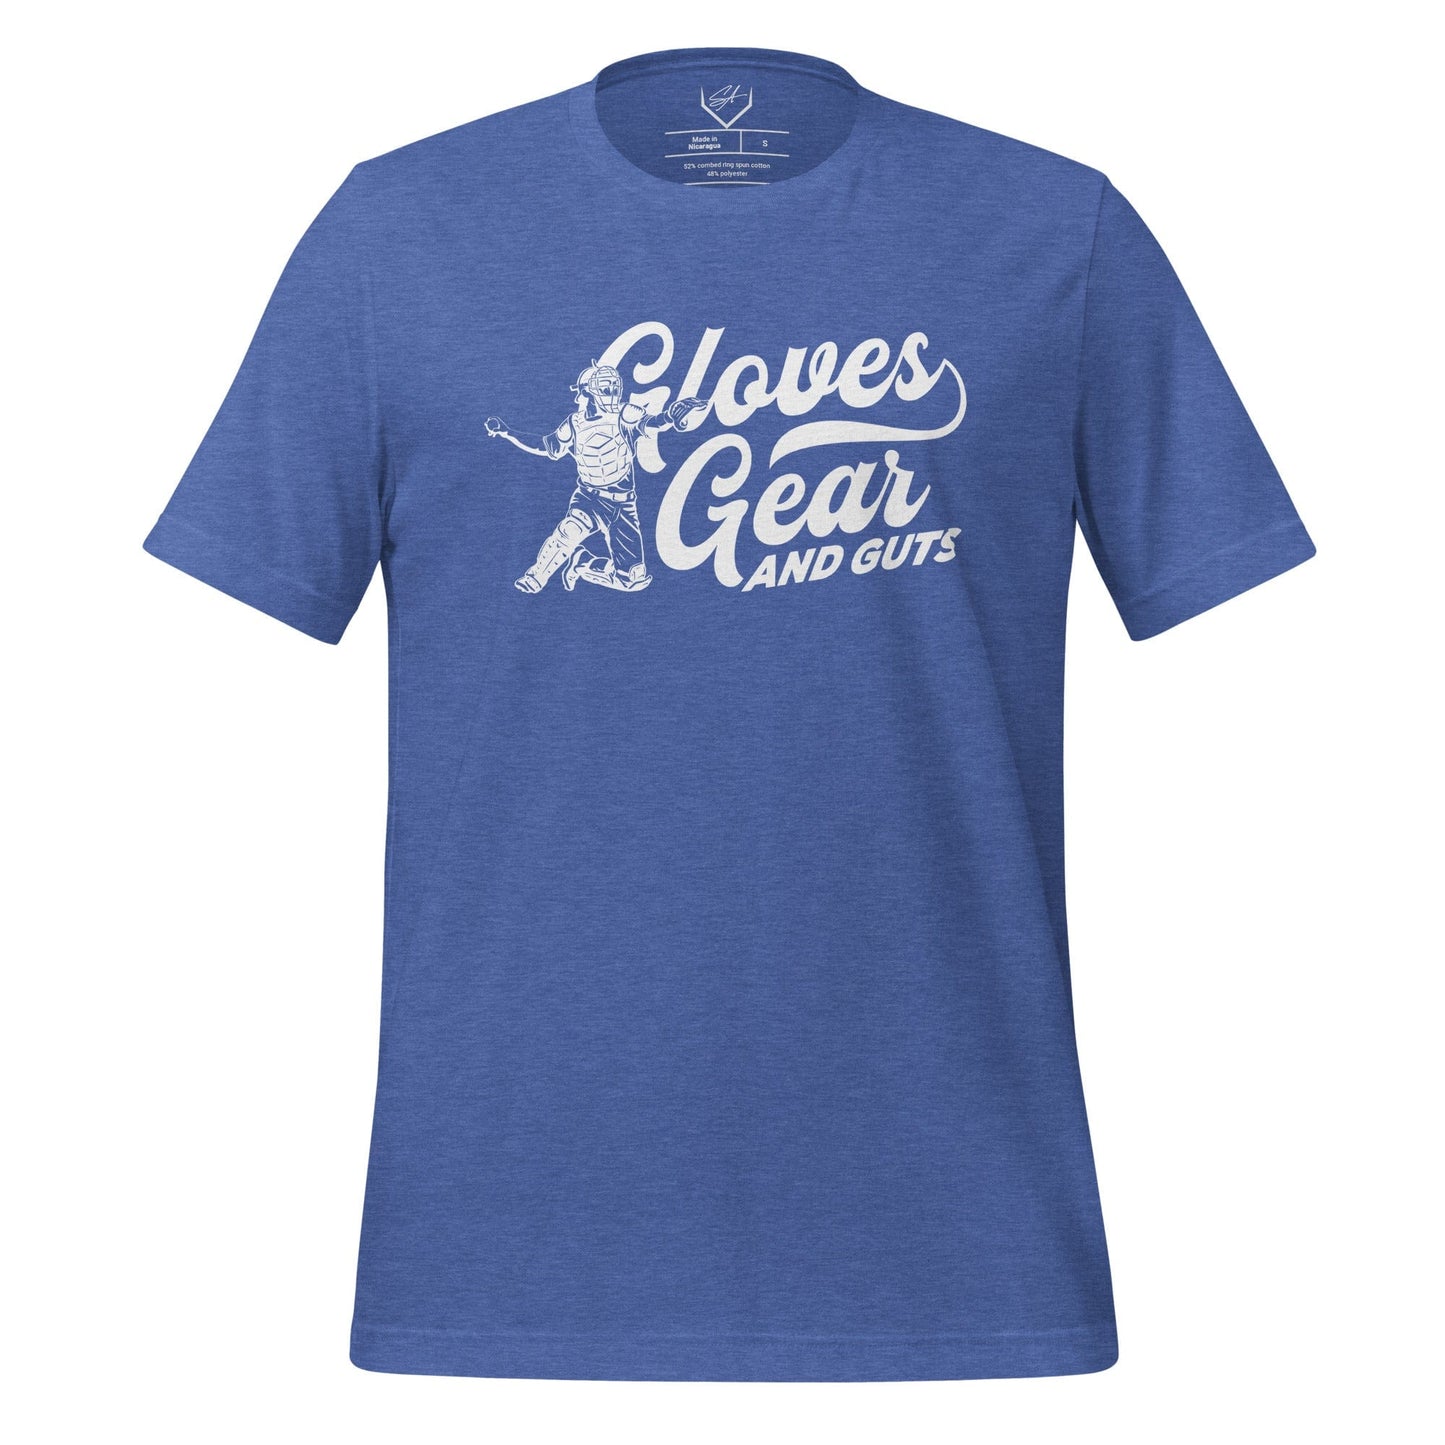 Gloves Gear And Guts - Adult Tee